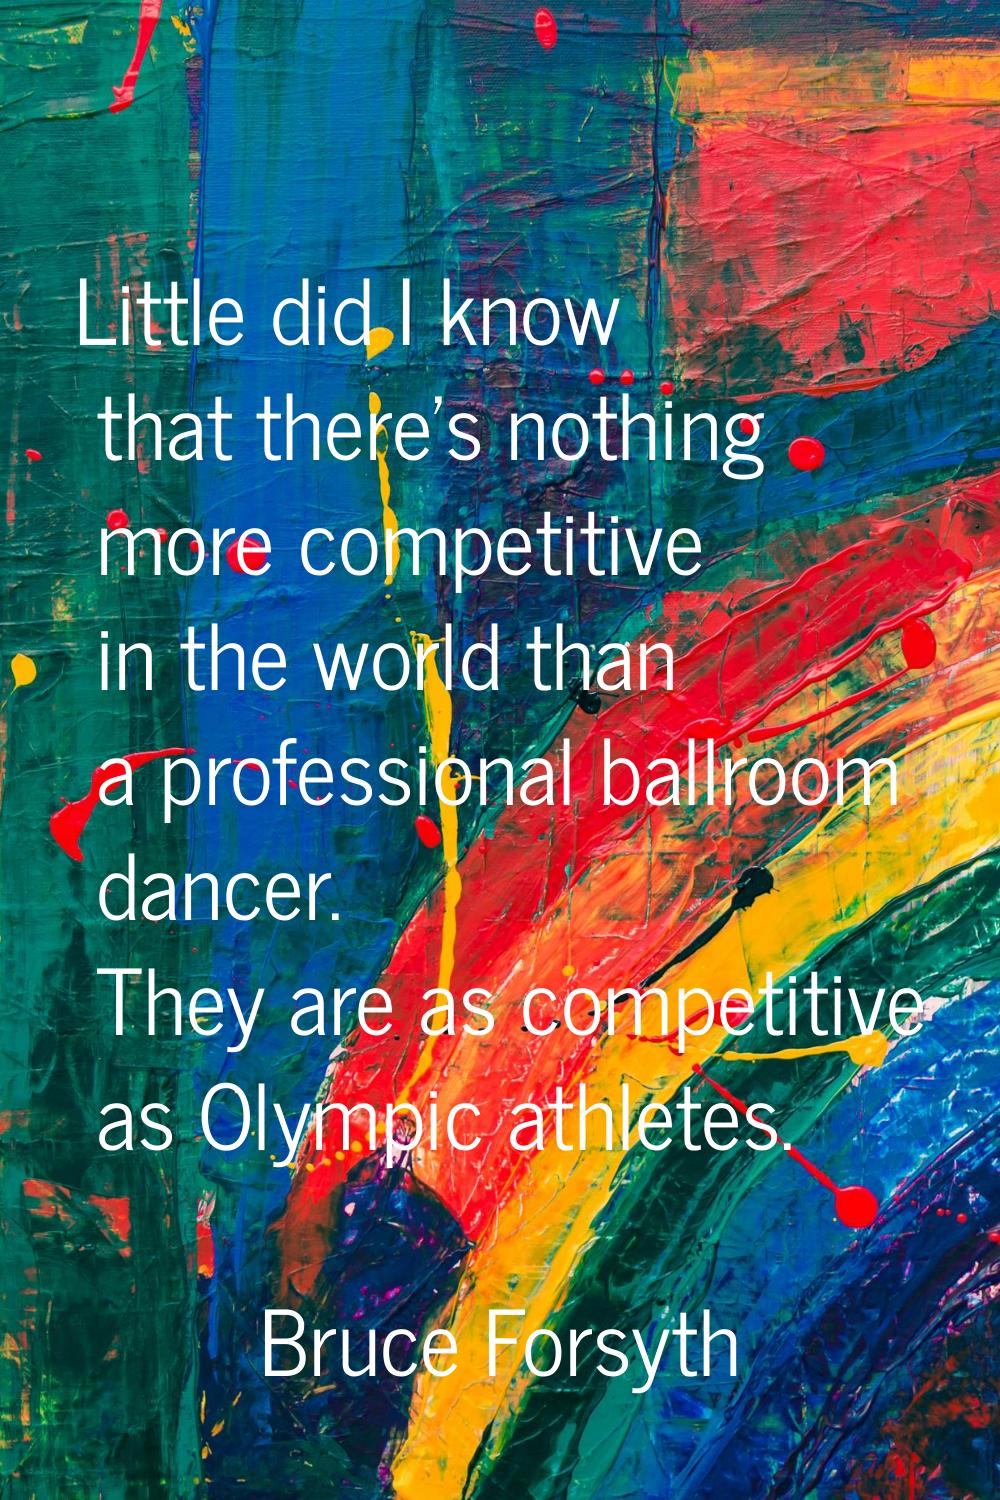 Little did I know that there's nothing more competitive in the world than a professional ballroom d